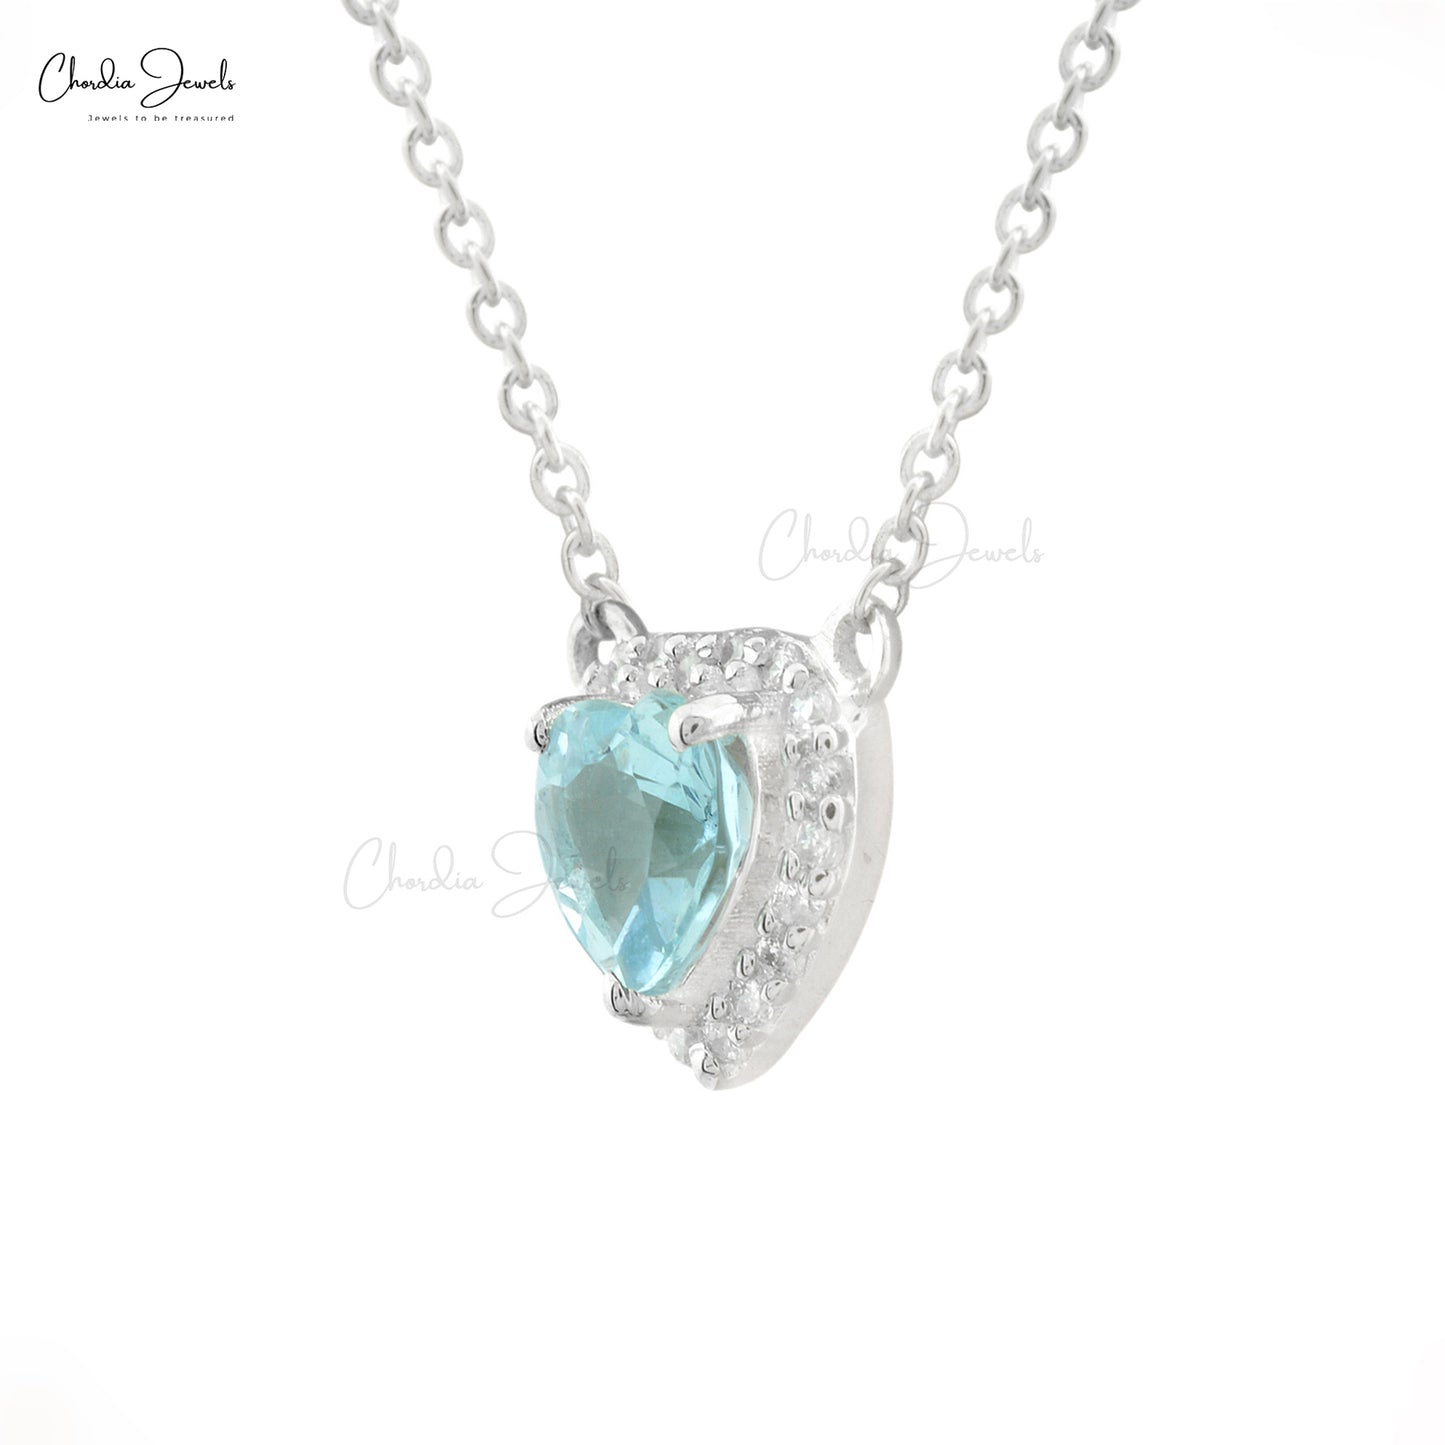 Vintage Heart Shape Natural Aquamarine Gemstone Necklaces Pendant 14k Real White Gold Diamond Necklace for Mother's Father's Day Gifts